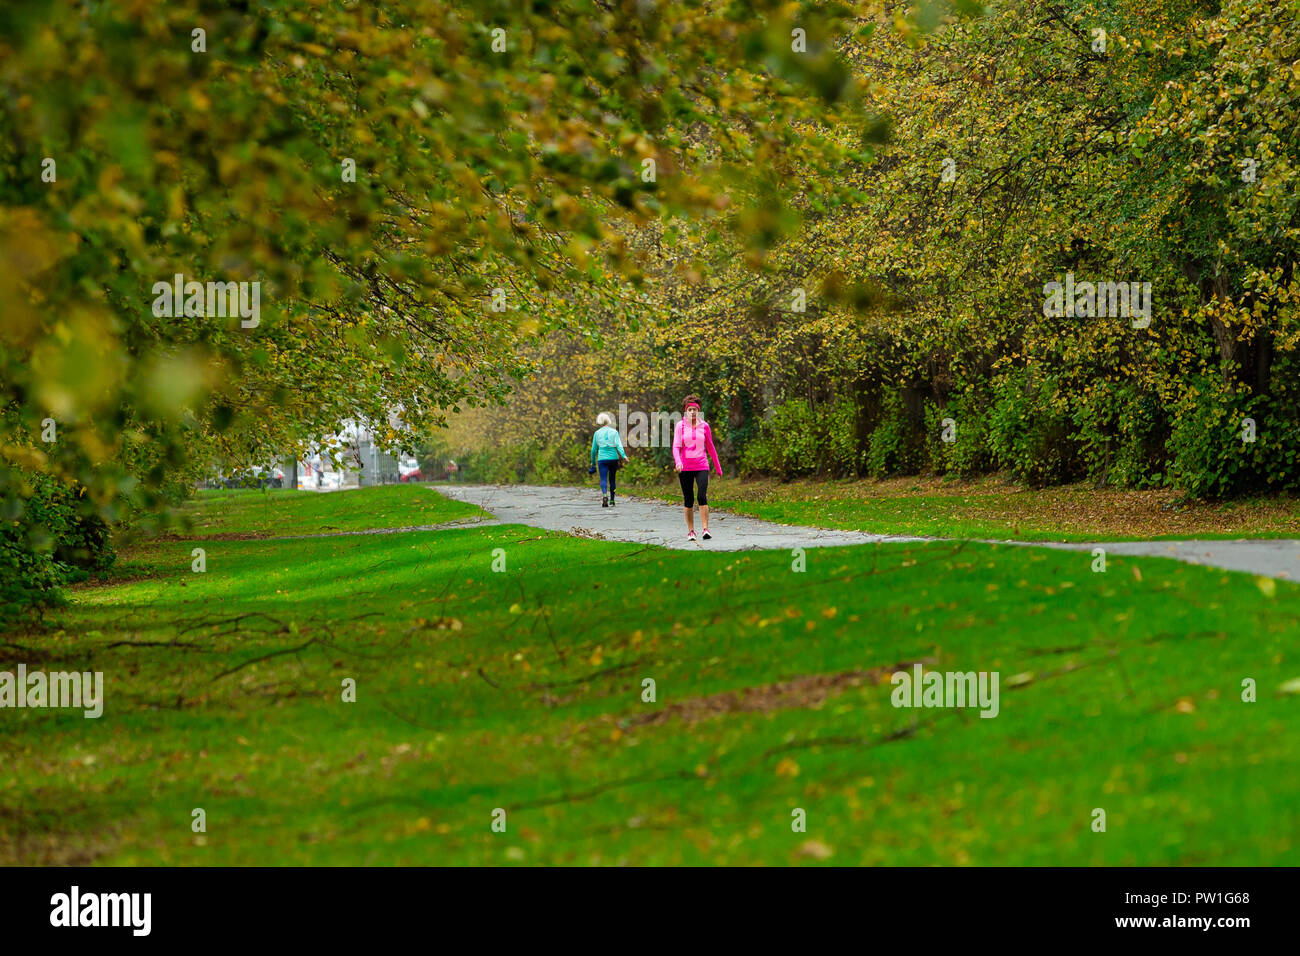 Celbridge, County Kildare, Ireland. 12th Oct, 2018: The aftermath of Storm Callum in the Castletown Park, Celbridge. Calm morning and couple of fallen branches but no major damage to the forestry. People out walking and jugging before the heavy rain foretasted for the afternoon as Storm Callum moves across Ireland. Credit: Michael Grubka/Alamy Live News Stock Photo